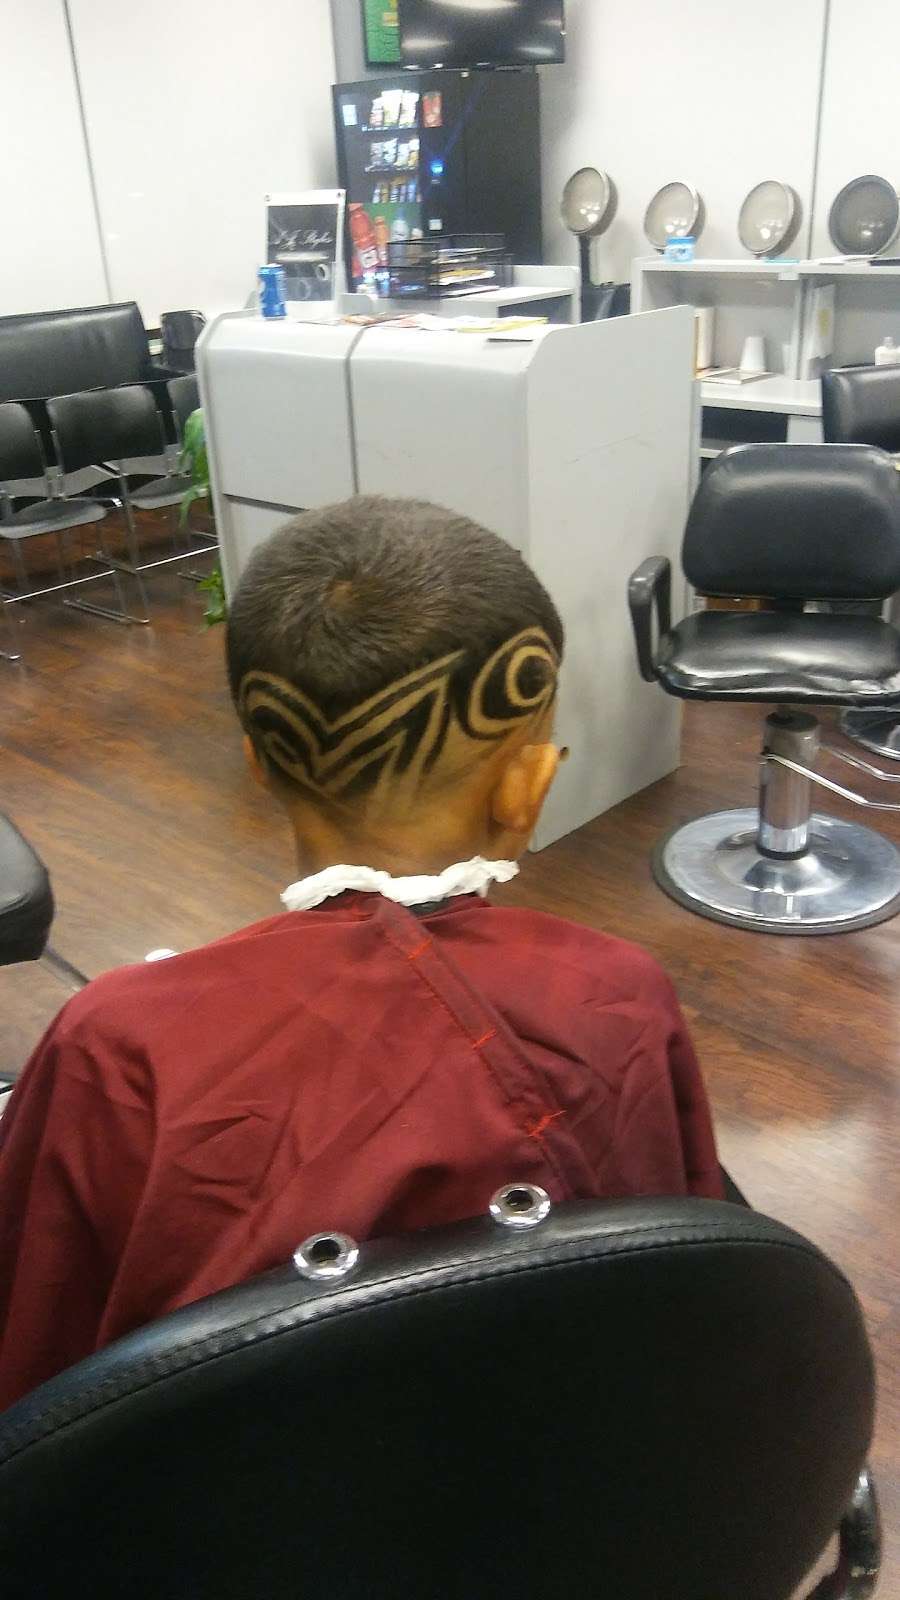 AJ Styles Beauty and Barber Salon, LLC. | 6624 W North Ave, Chicago, IL 60707 | Phone: (872) 256-5666